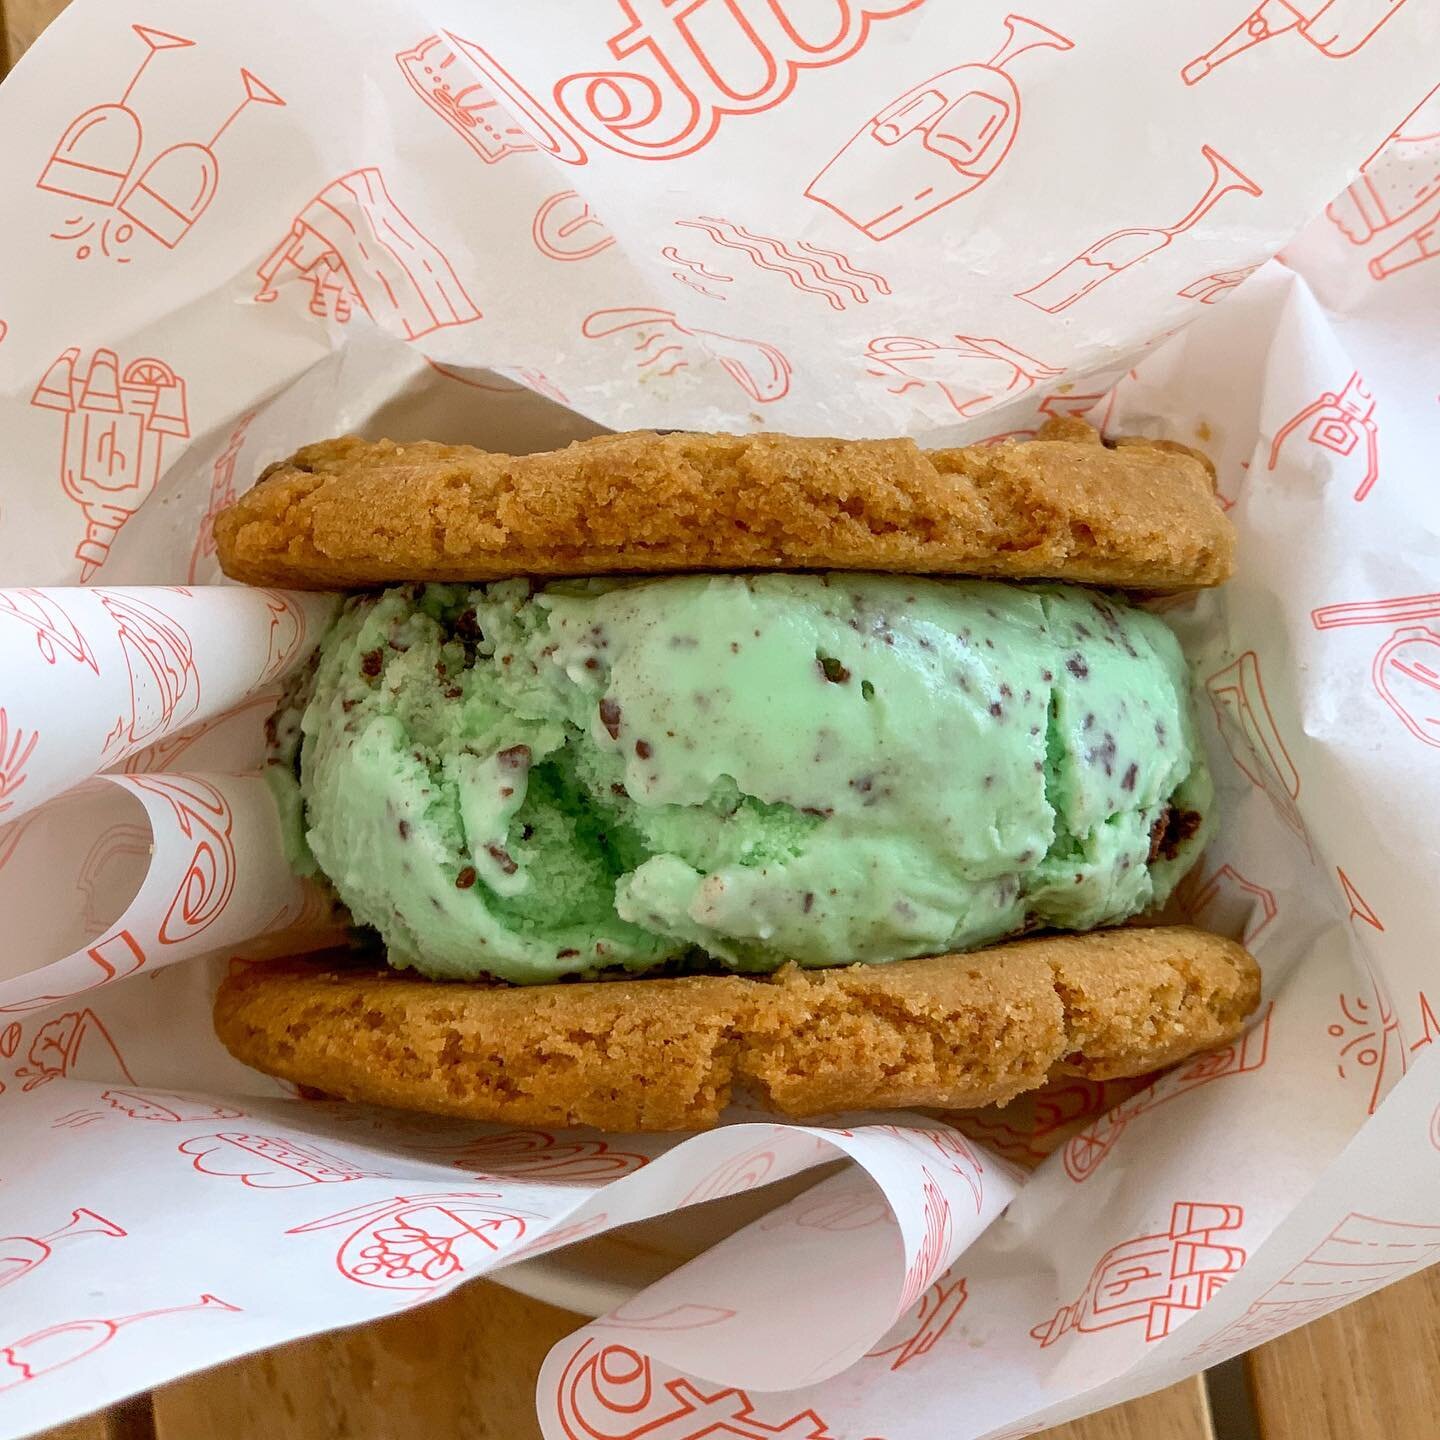 Treat yourself with our Ice Cream Kookie.  Fresh baked cookies and deliciously creamy ice cream. 🍪